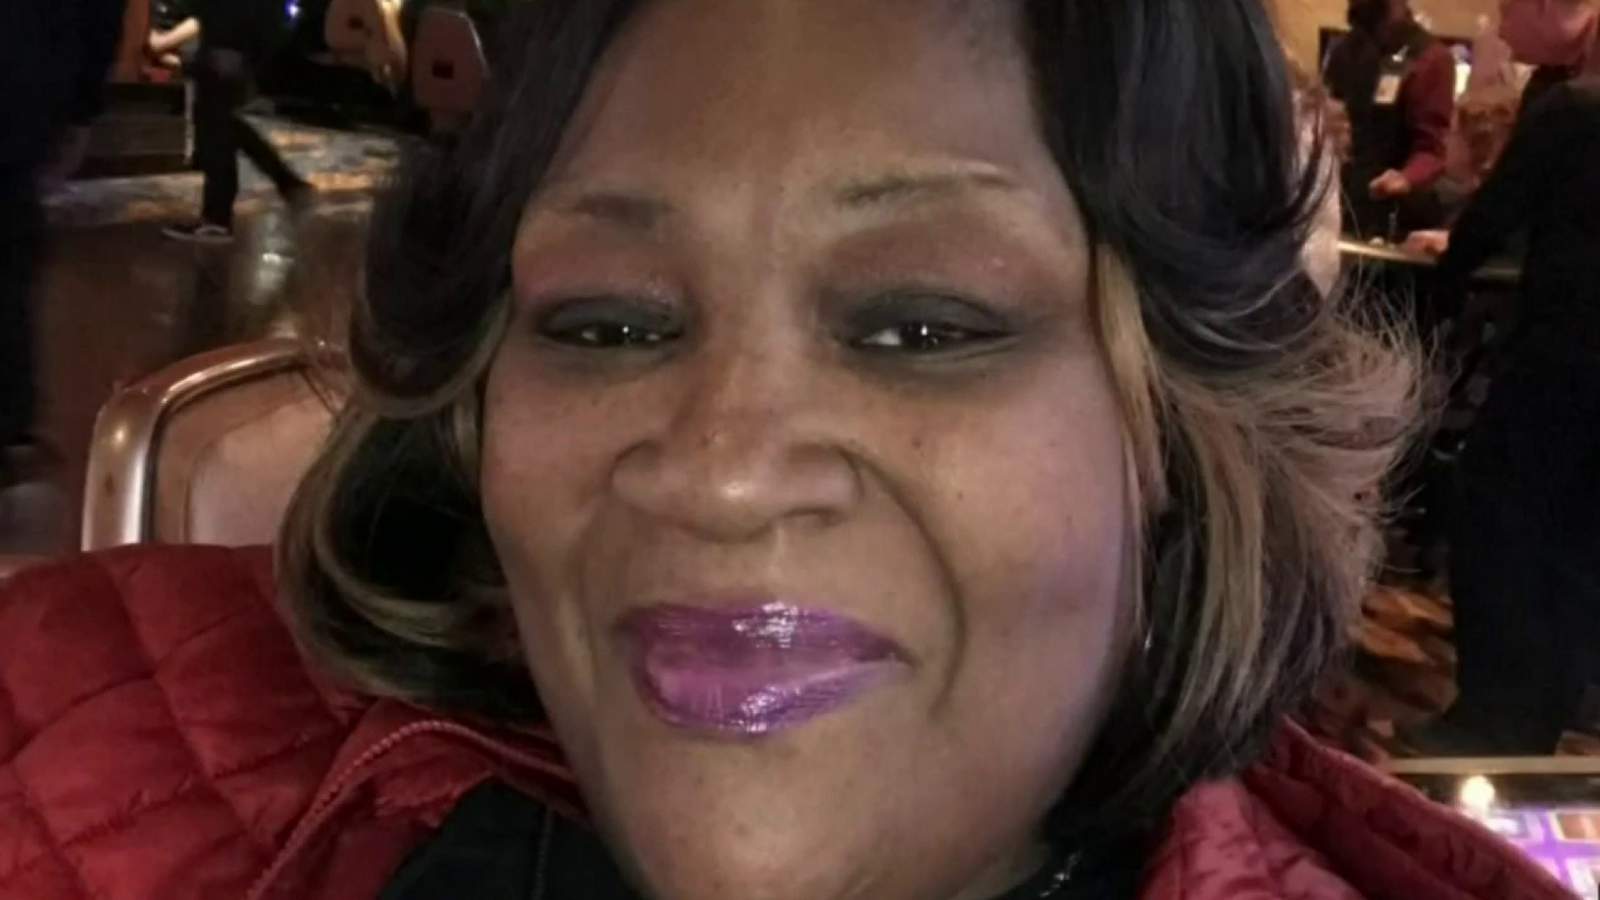 Detroit grandmother falls on hard times because of COVID-19